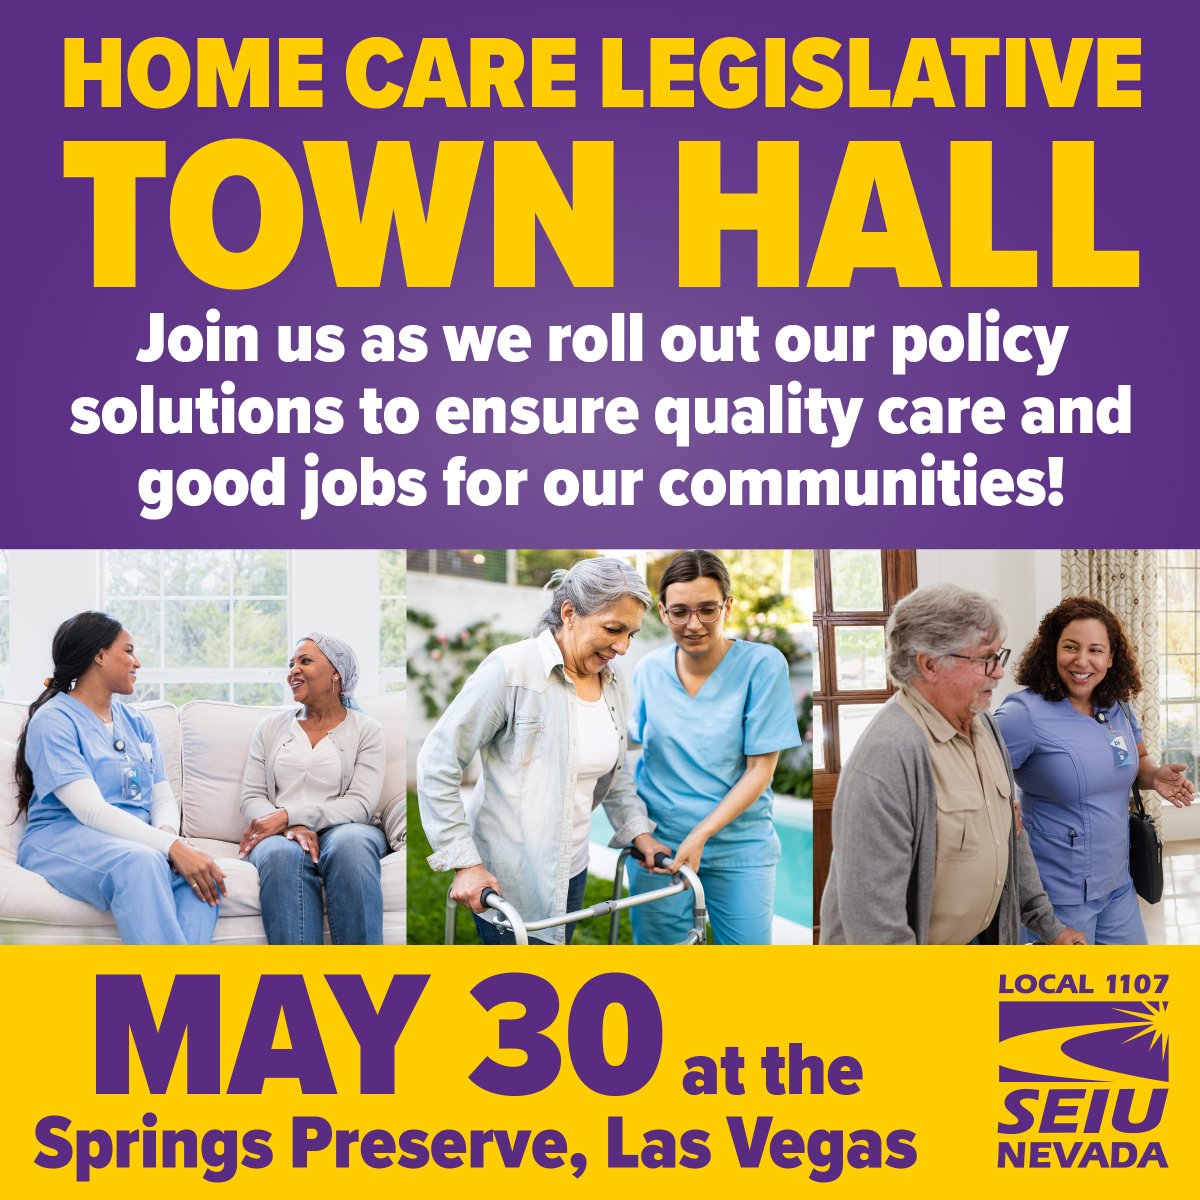 Join Our Home Care Legislative Town Hall!  

WHEN: Thursday, May 30, 2024 
Food and refreshments at 6 pm, program begins at 7 pm  

WHERE: Springs Preserve, 333 S. Valley View Blvd., Las Vegas  

RSVP: bit.ly/homecaretownha… 

#HomeCareForNV #CareIsEssential #NVLeg #NVPol